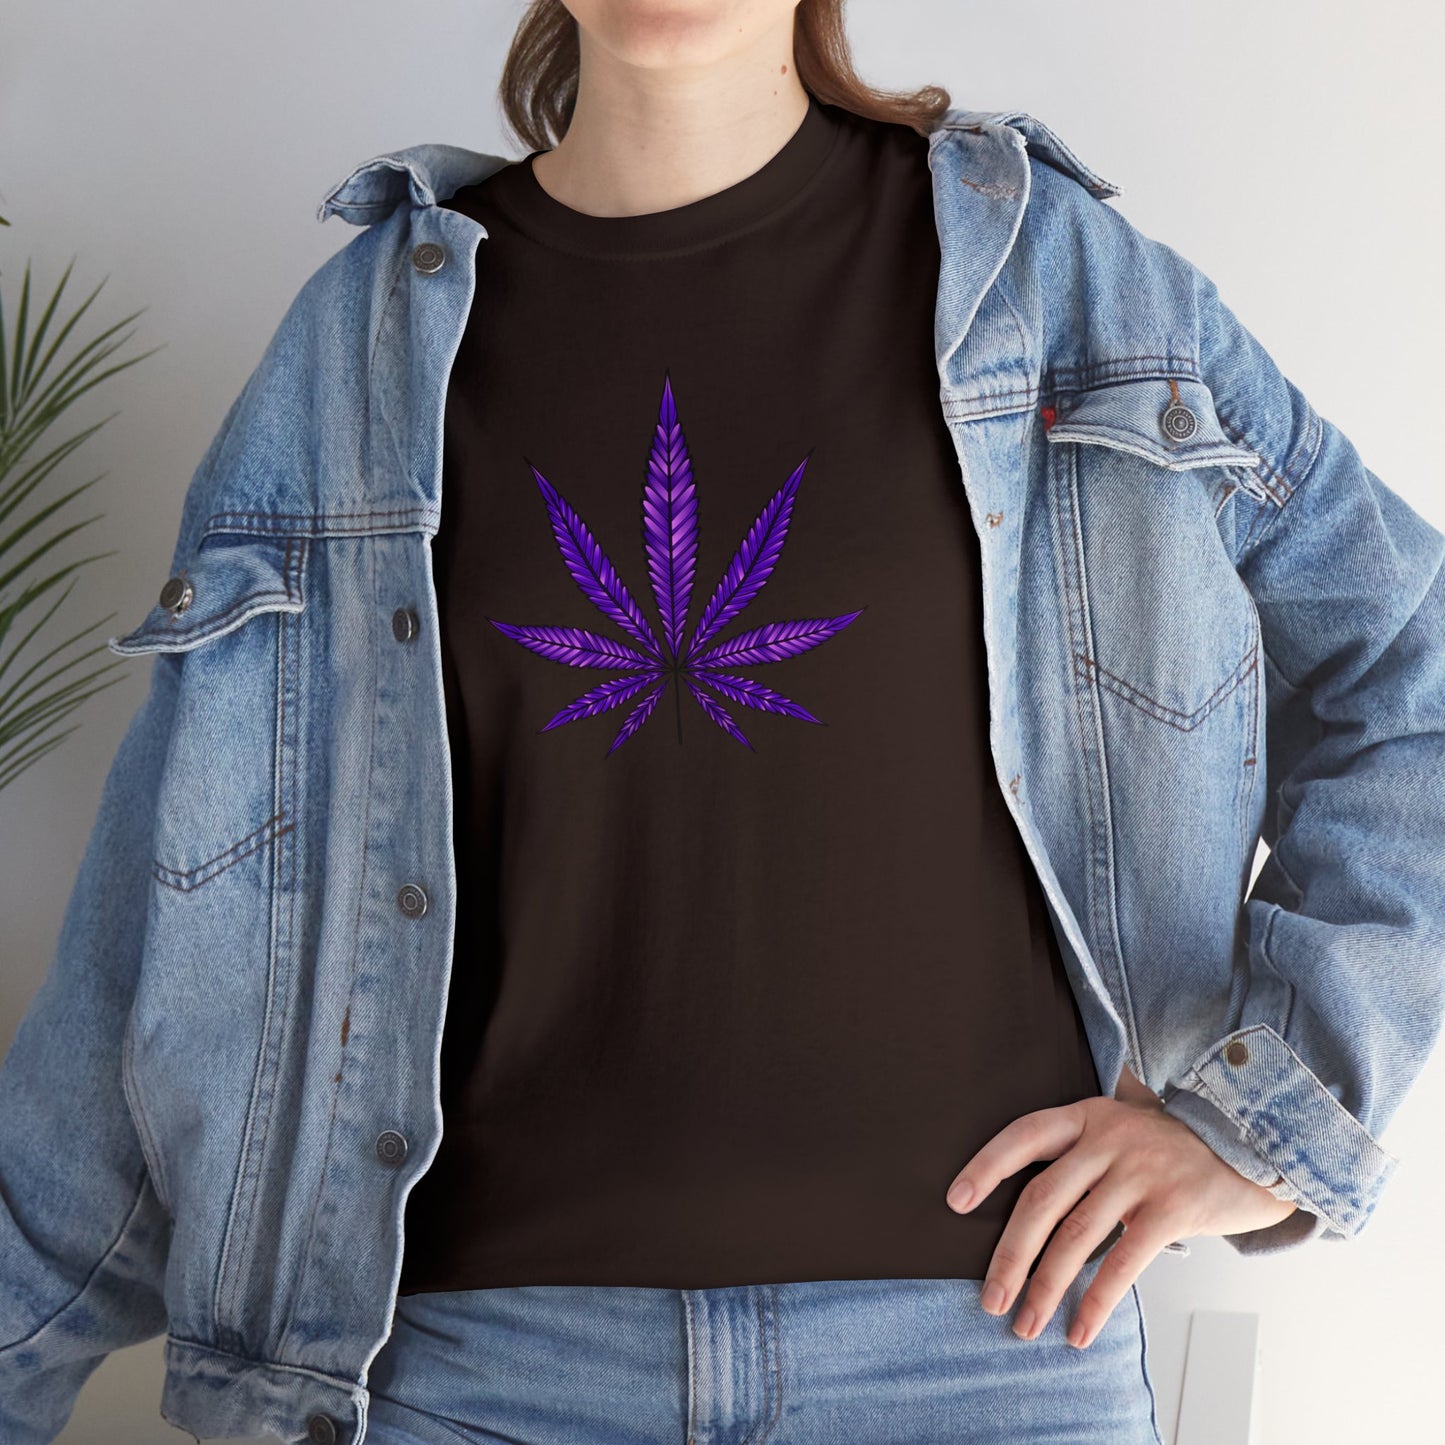 A person wearing a Purple Cannabis Leaf Tee with a purple cannabis leaf design, layered with an open denim jacket, standing against a neutral background.